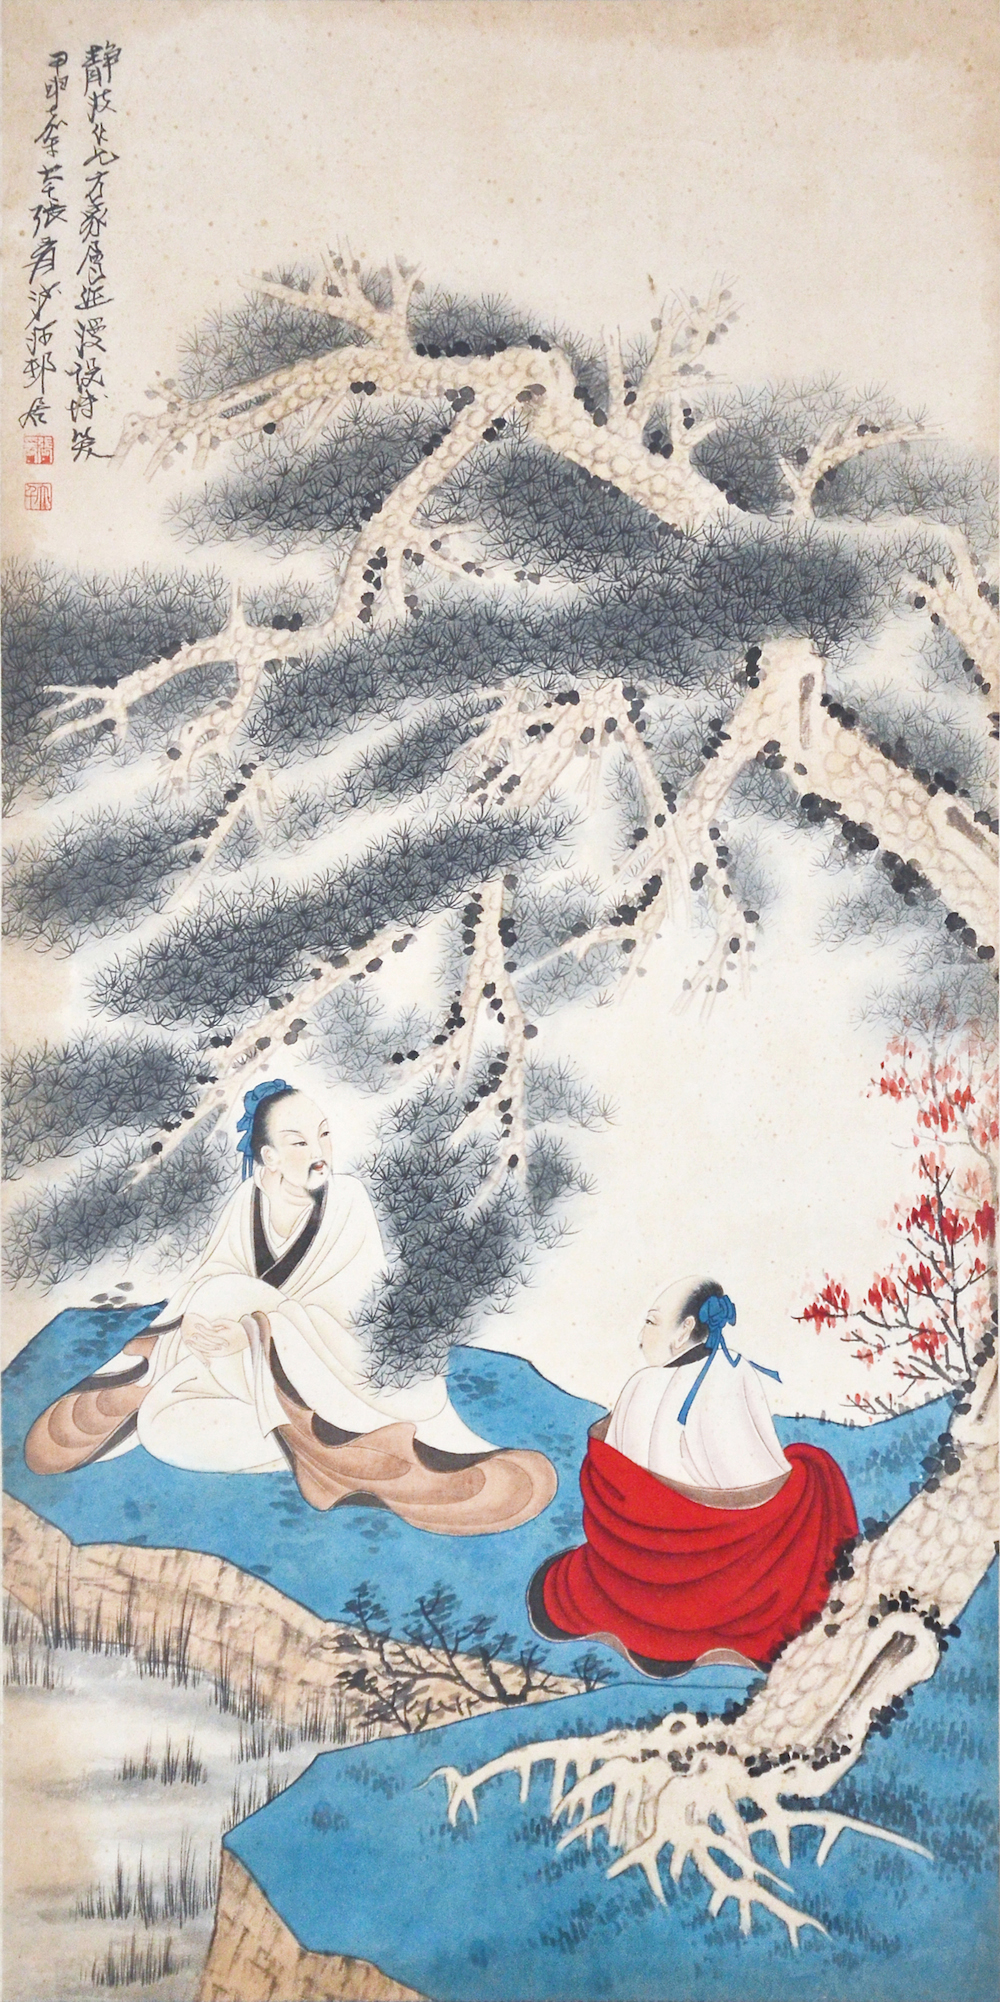 Color fields of blue and red dramatize Two Solitary Hermits, Zhang Daqian’s depiction of Boyi and Shuqi, the Zhou Dynasty pacifists. $60,000 - $80,000